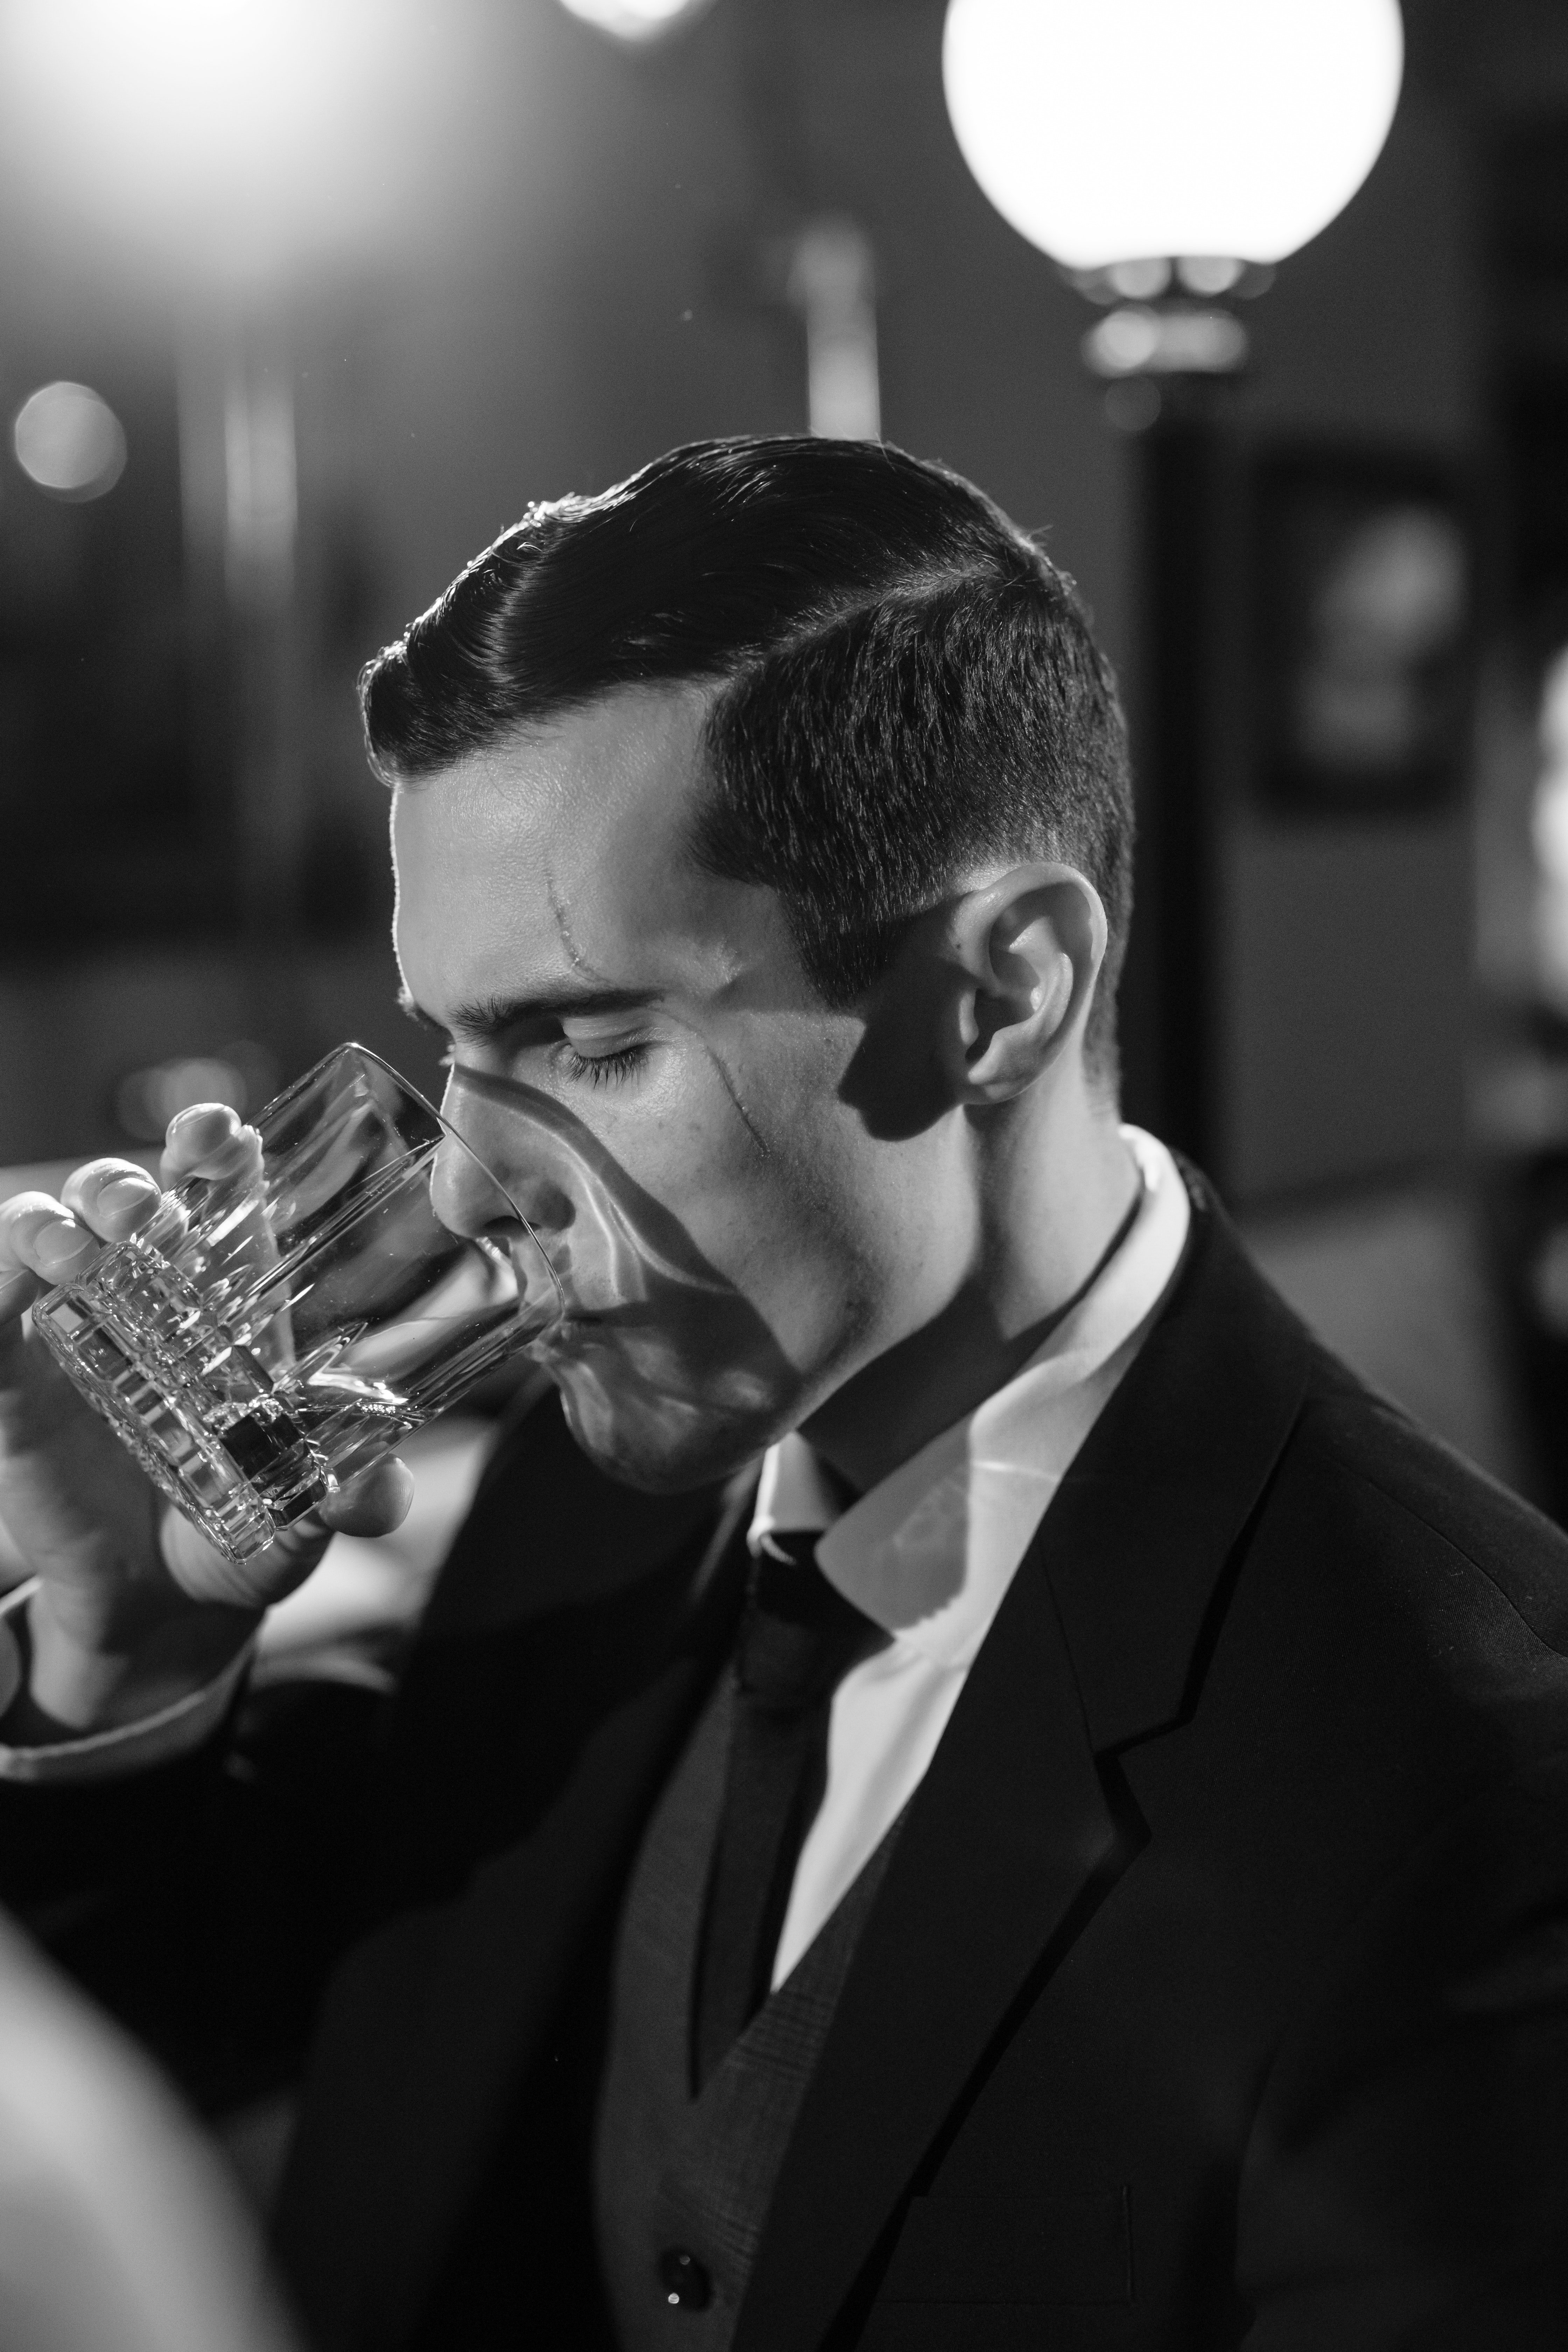 Chris was drinking whisky when he suddenly felt sick. | Photo: Pexels